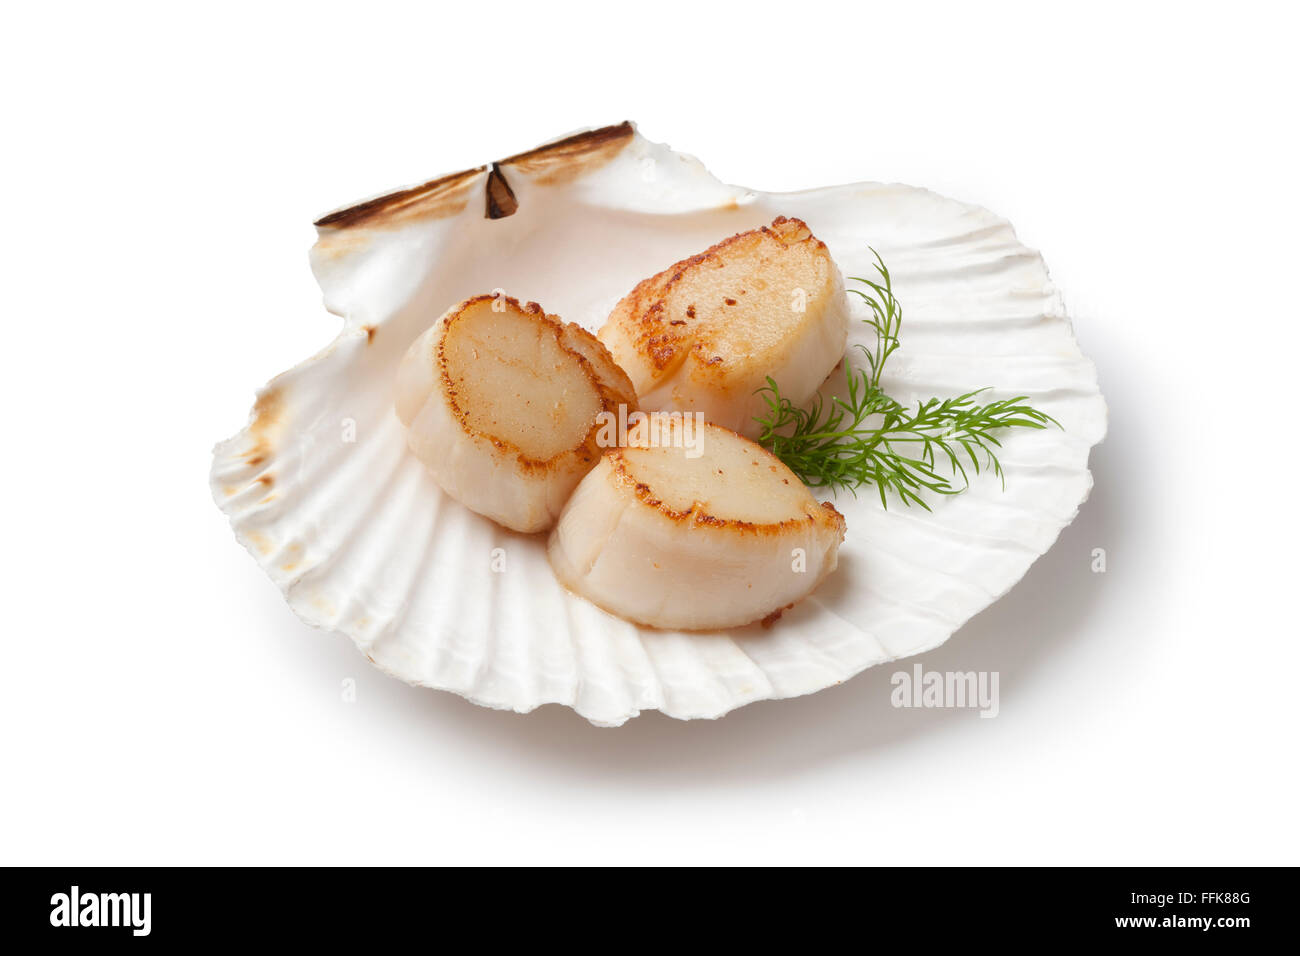 Seared scallops served in a shell with dill on white background Stock Photo